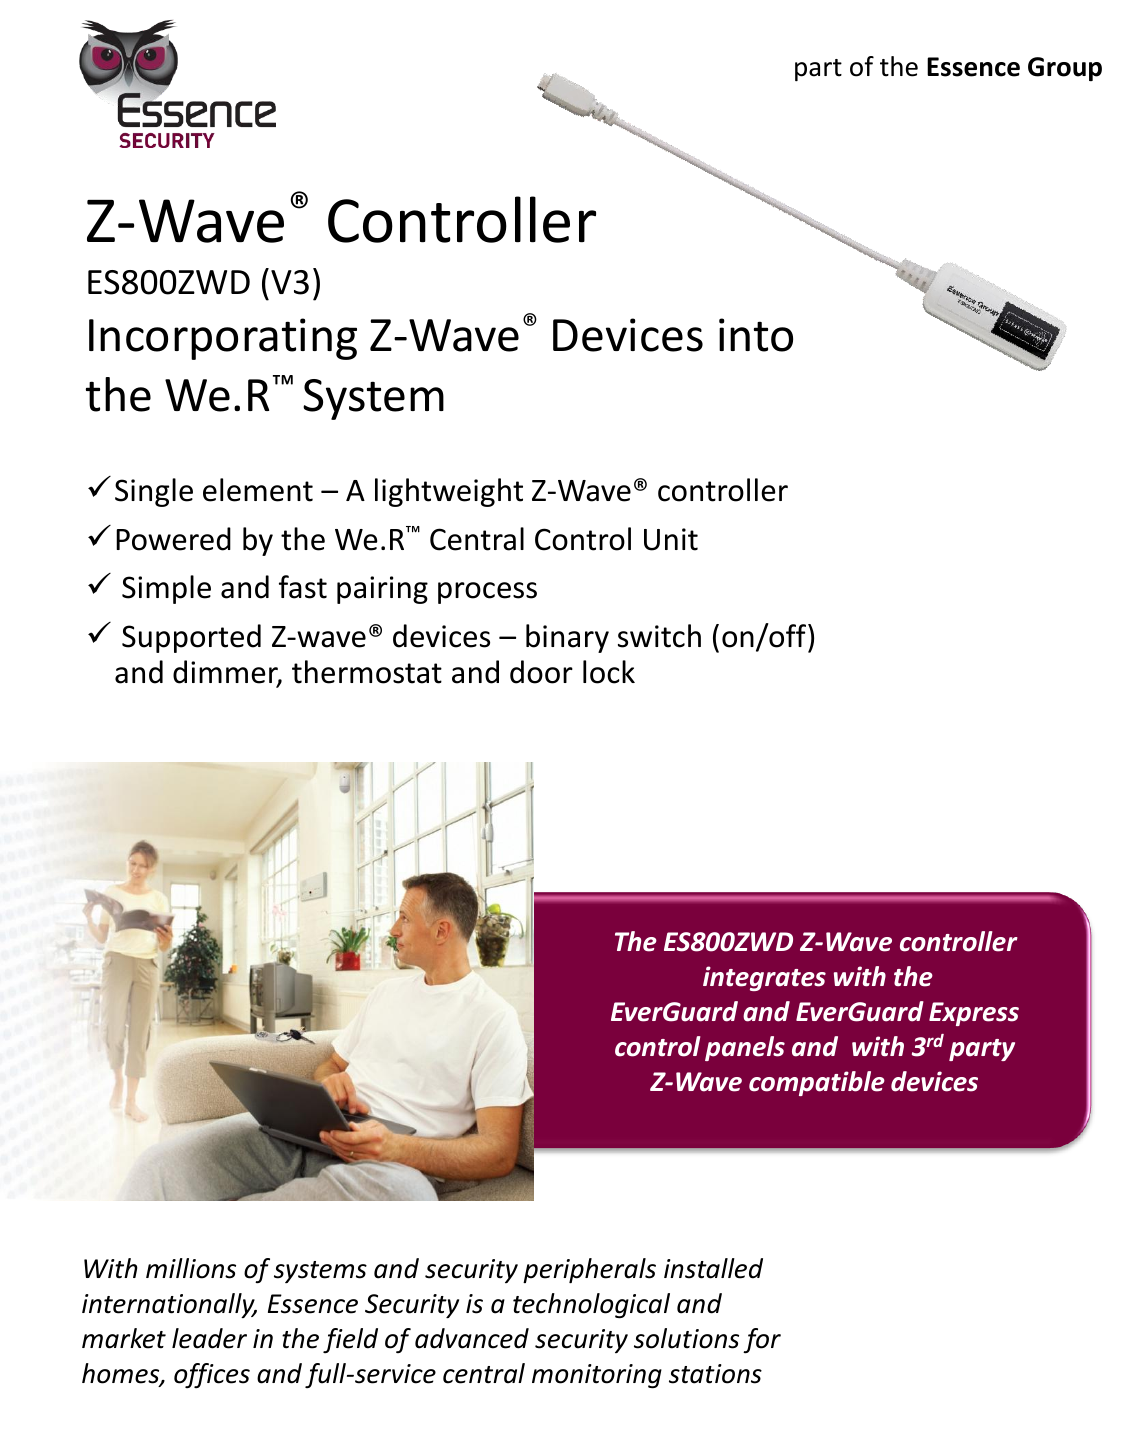 Z-Wave® Controller ES800ZWD (V3) Incorporating Z-Wave® Devices into the We.R™ System    With millions of systems and security peripherals installed internationally, Essence Security is a technological and market leader in the field of advanced security solutions for homes, offices and full-service central monitoring stations The ES800ZWD Z-Wave controller  integrates with the EverGuard and EverGuard Express control panels and  with 3rd party  Z-Wave compatible devices part of the Essence Group Single element – A lightweight Z-Wave® controller Powered by the We.R™ Central Control Unit  Simple and fast pairing process   Supported Z-wave® devices – binary switch (on/off) and dimmer, thermostat and door lock 